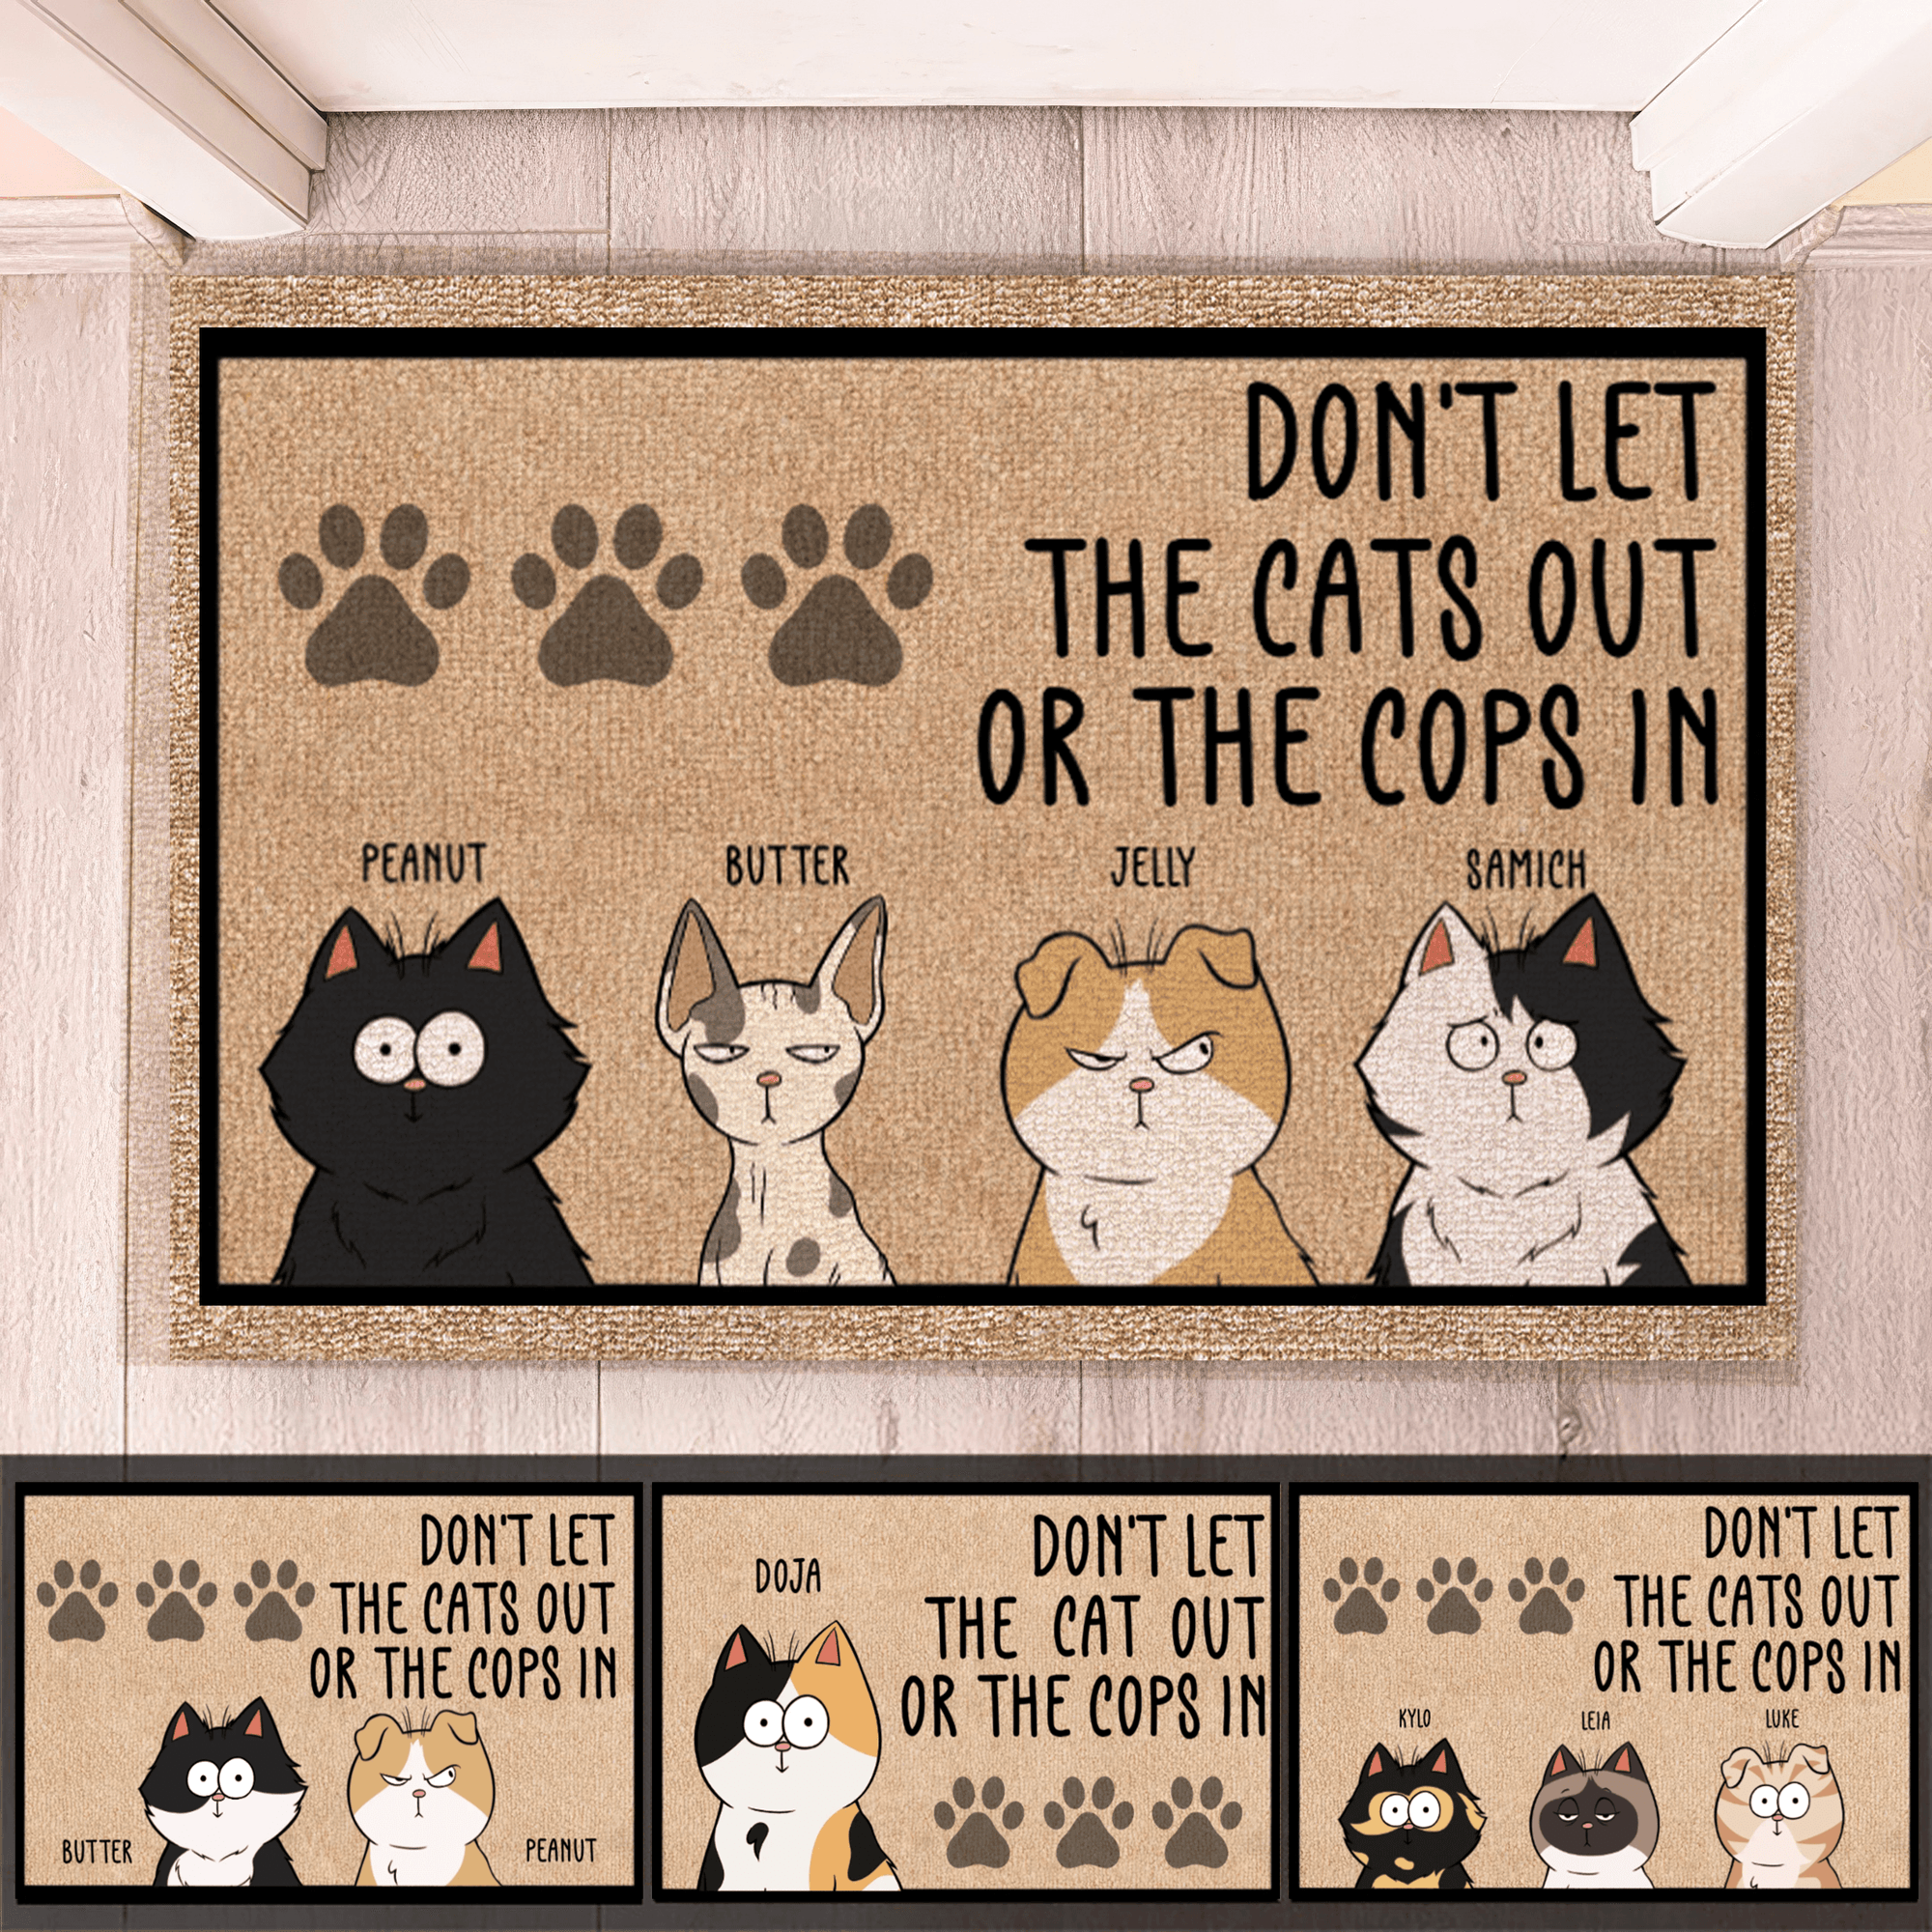 Don't Let The Cats Out Or The Cops In - Personalized Doormat - Birthday, Housewarming, Funny Gift for Homeowners, Friends, Cat Mom, Cat Dad, Cat Lovers, Pet Gifts for Him, Her - Suzitee Store